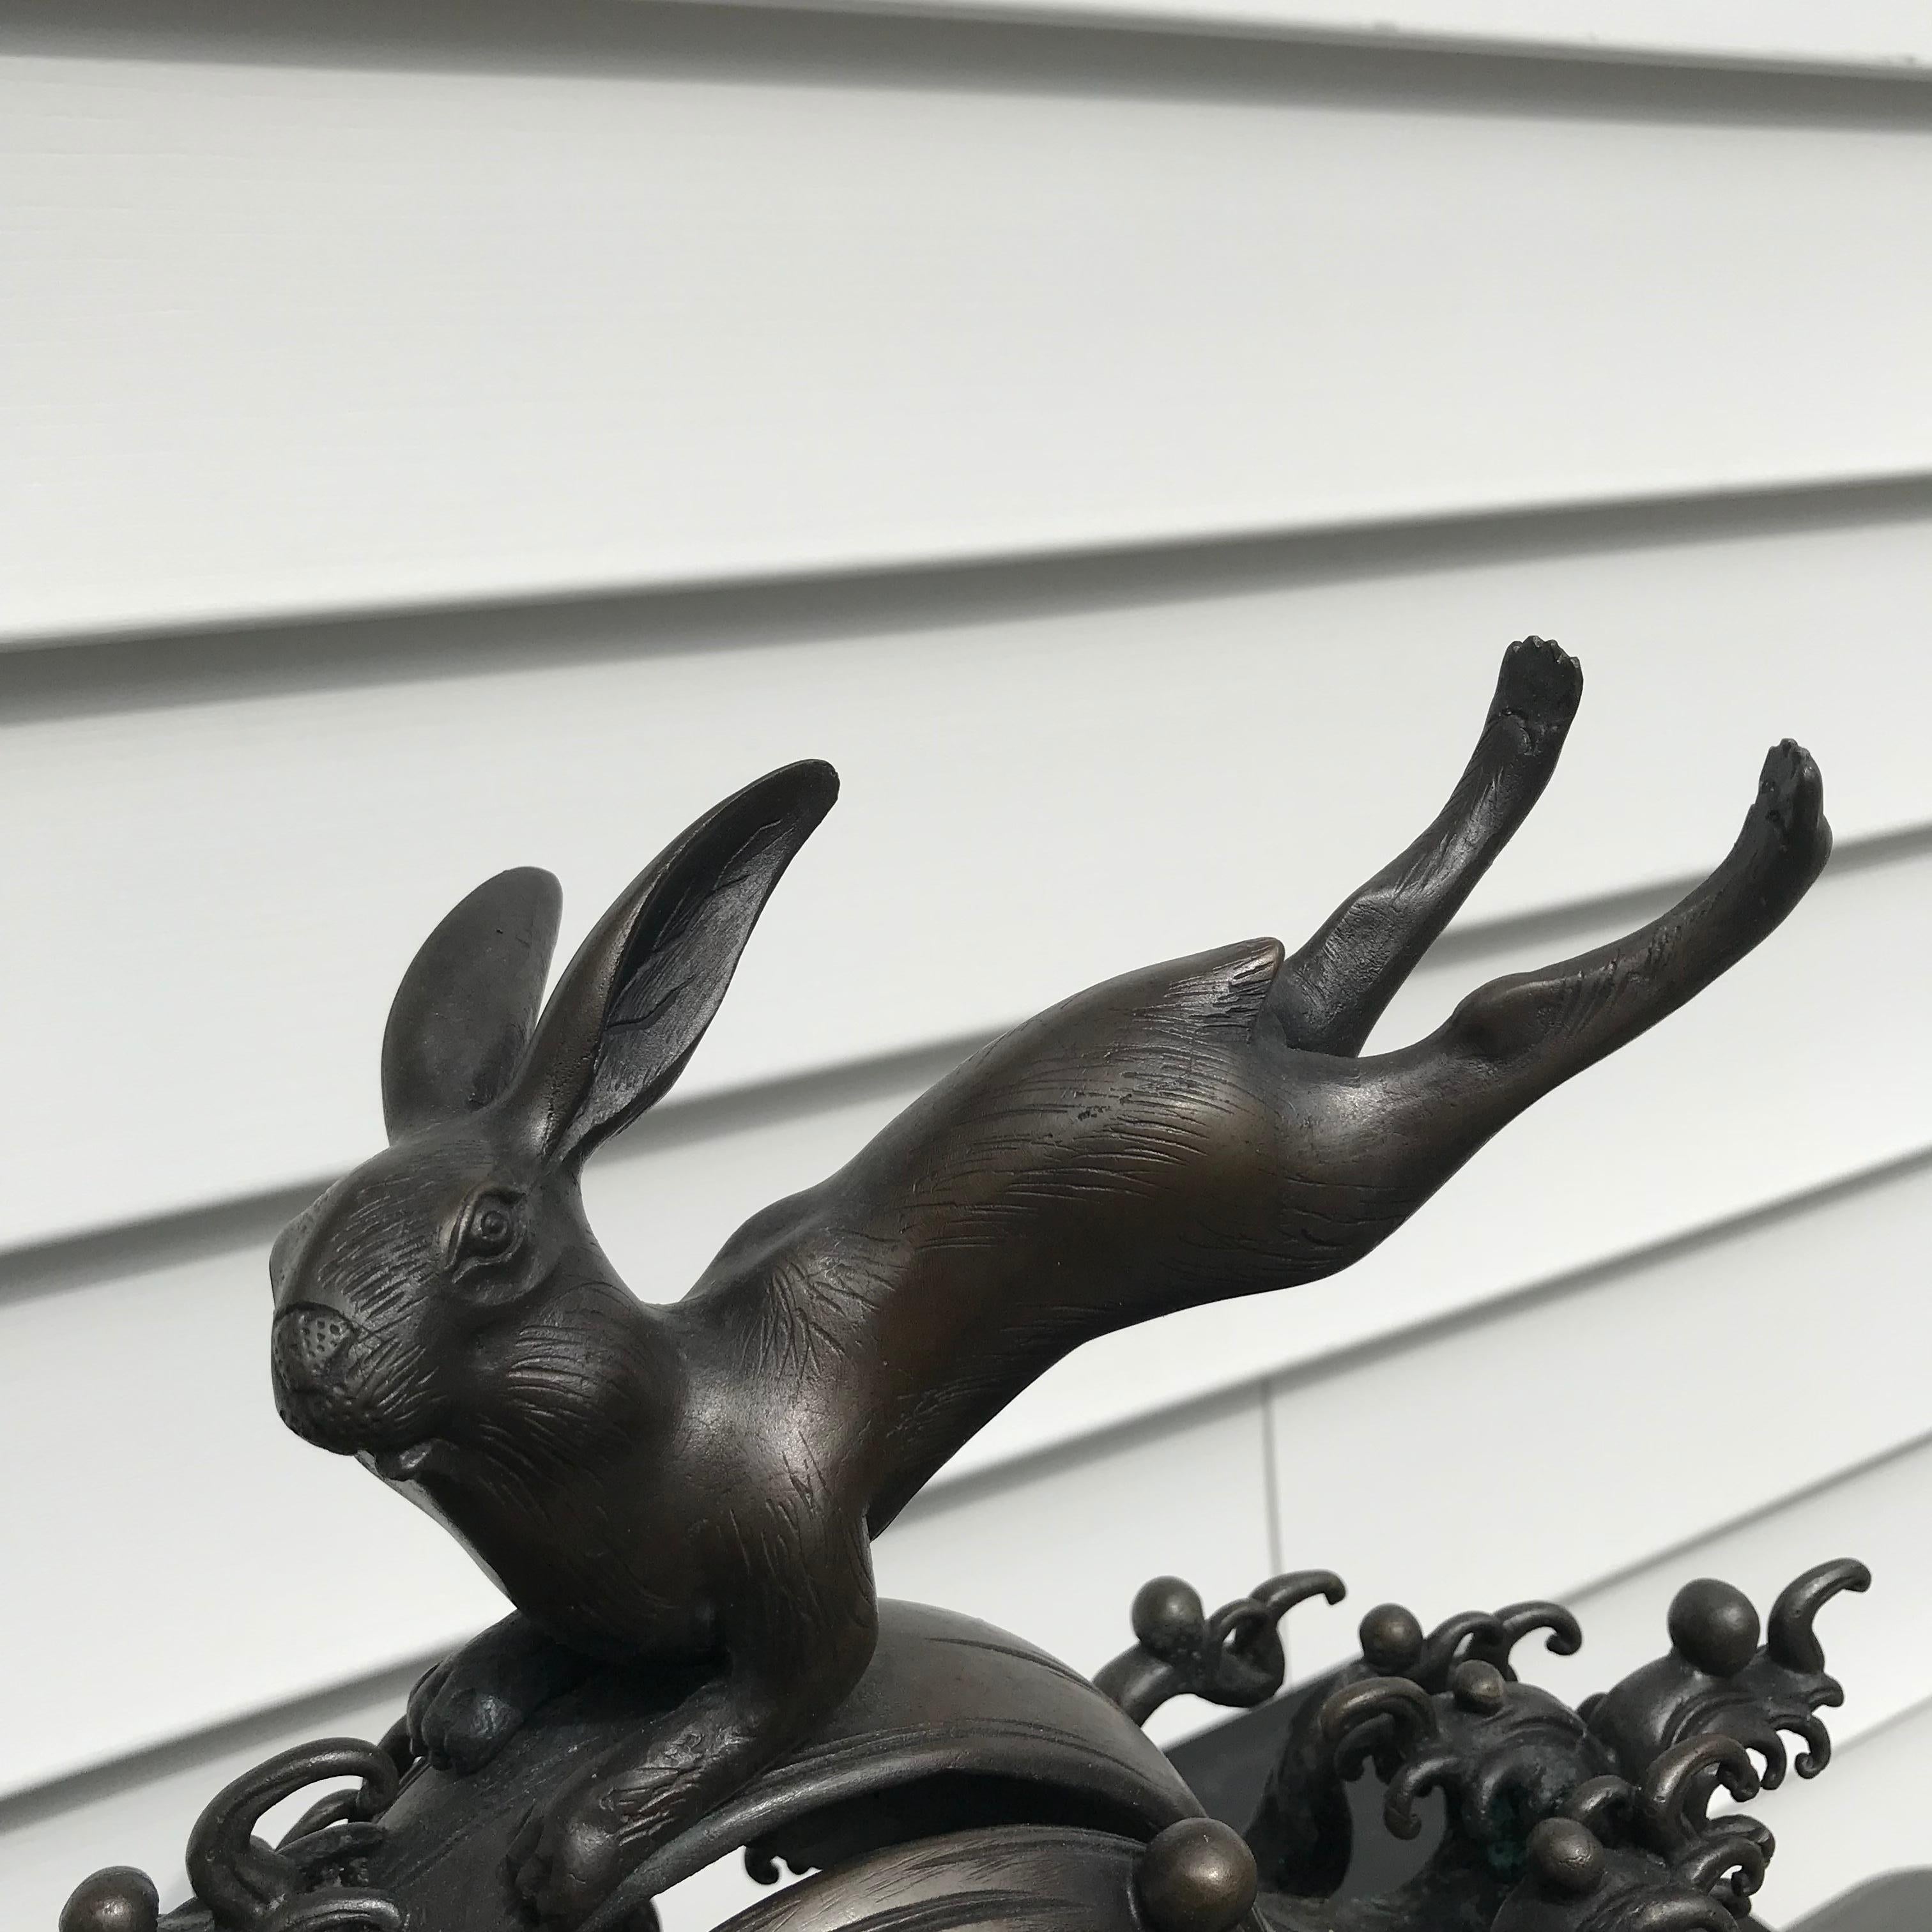 From our recent Japanese Kyoto Acquisitions travels.

Here's a first.

This is a stunning rabbit jumping over waves- one of the most unusual large-scale bronze rabbit sculptures we have come across -an unusually large one from the middle part of